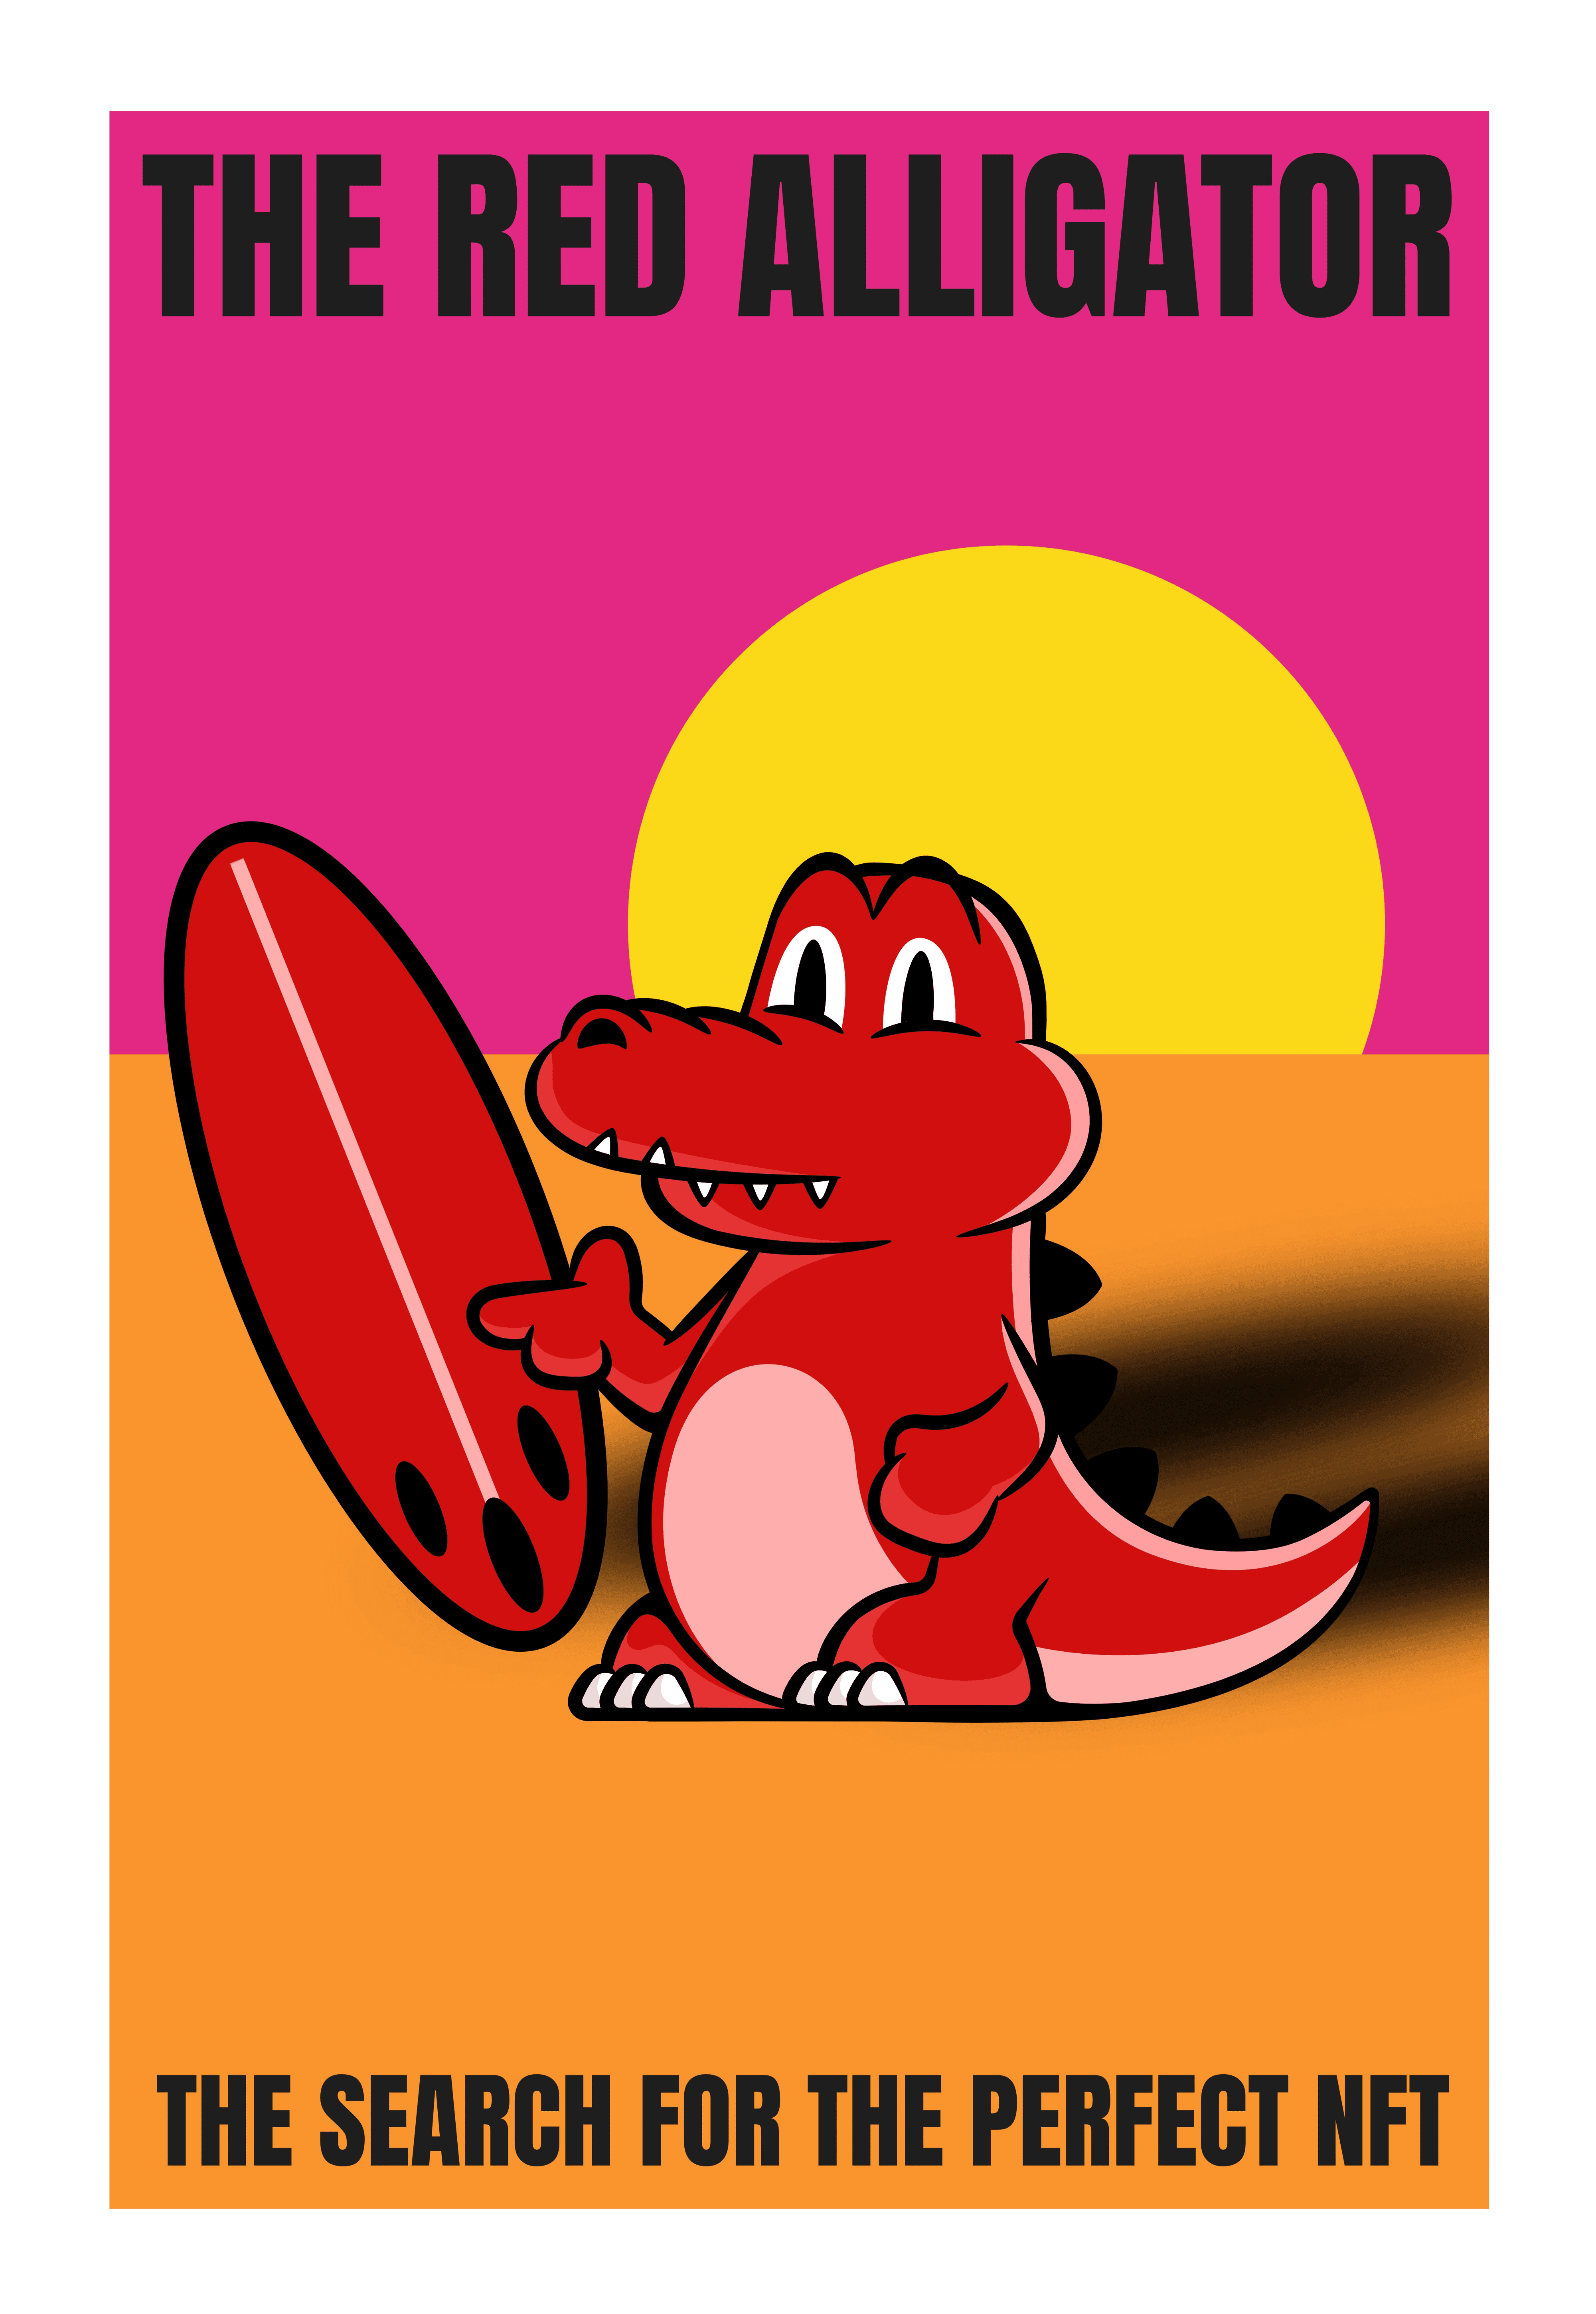 THE RED ALLIGATOR